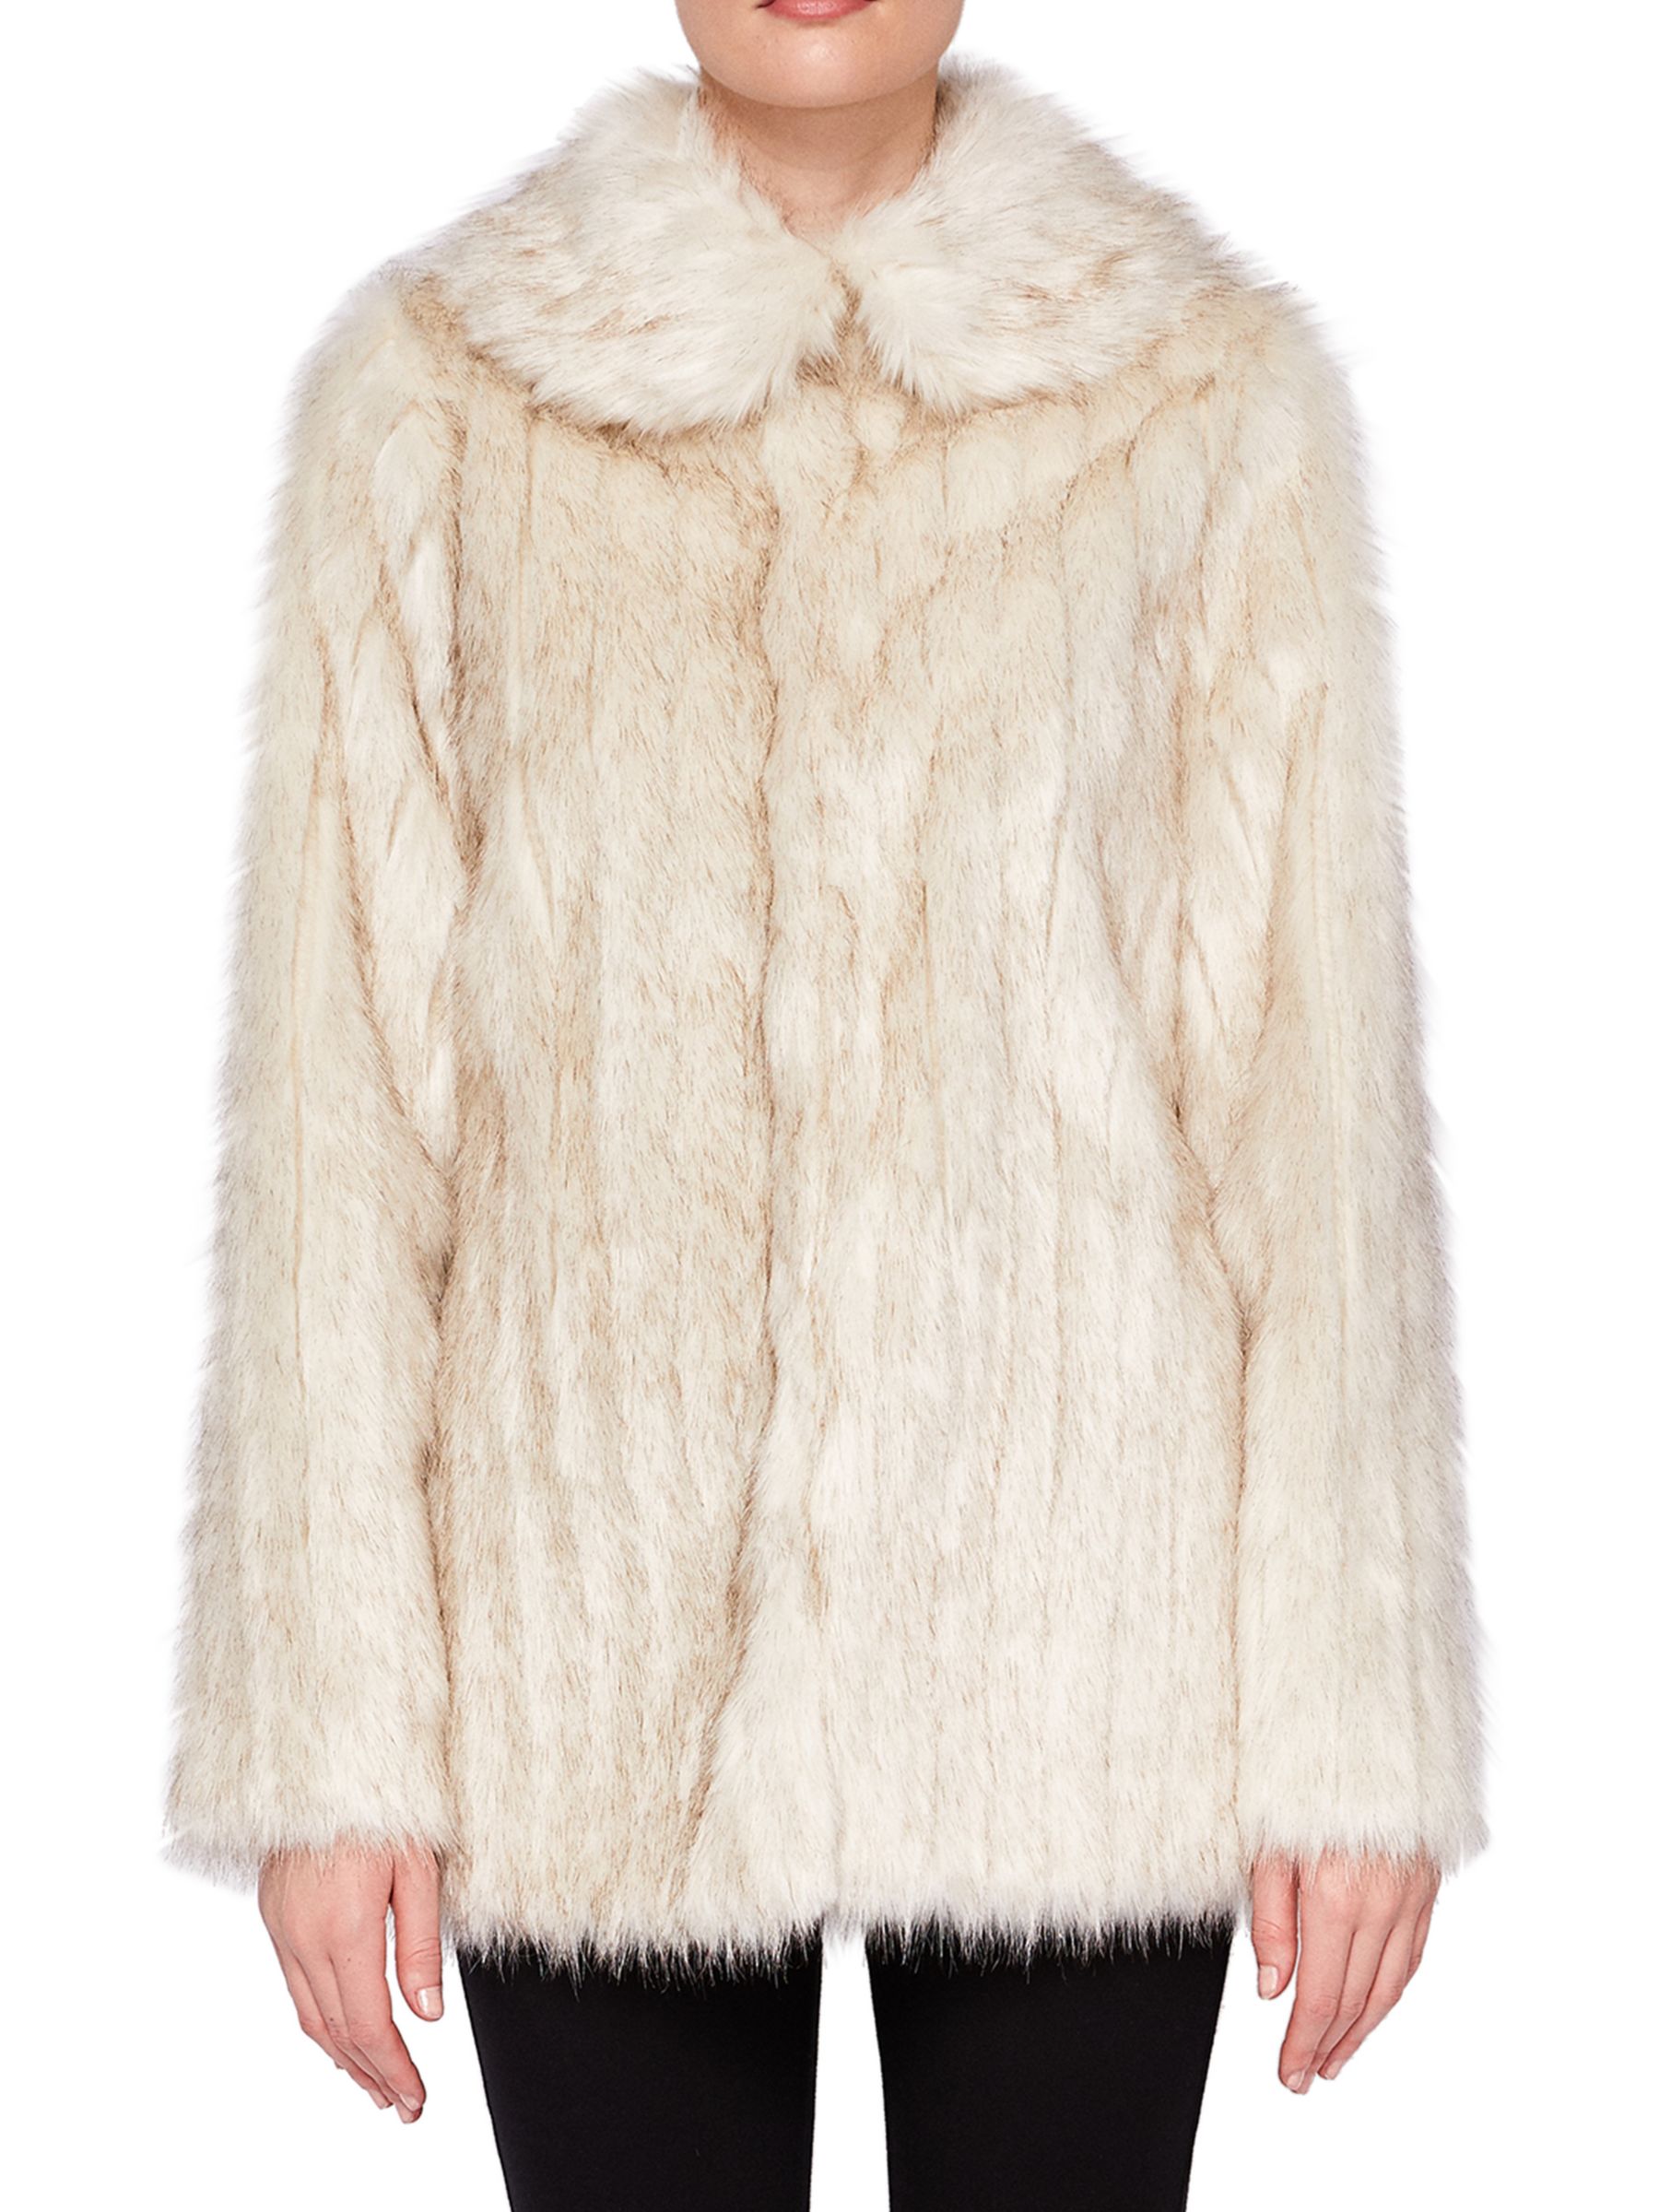 Ted Baker Olleen Winter Faux Fur Coat, Ivory at John Lewis & Partners